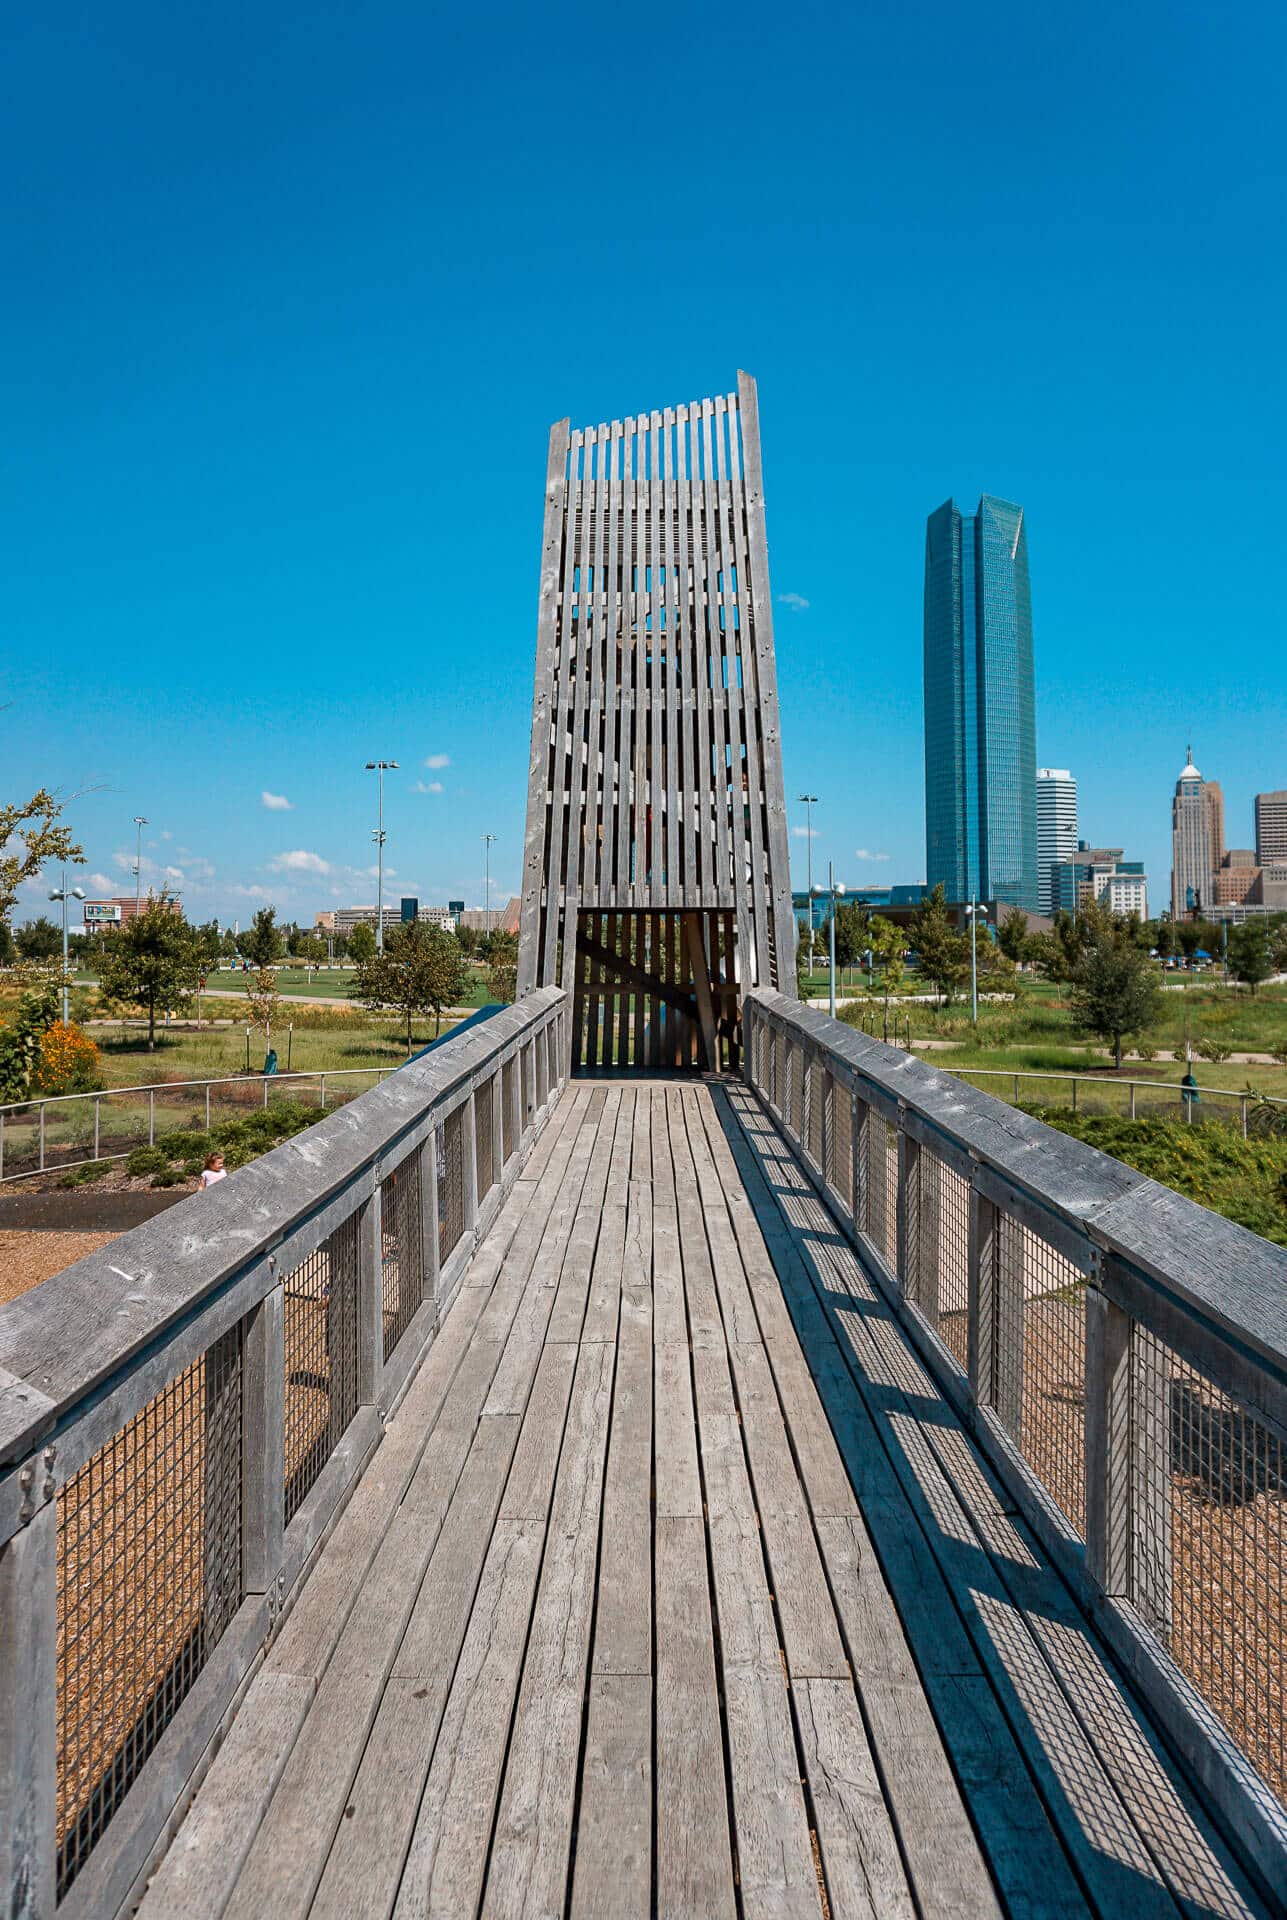 A wooden bridge to the tower with slides at Scissortail Park - playing here is one of the best things to do in Oklahoma City with toddlers.